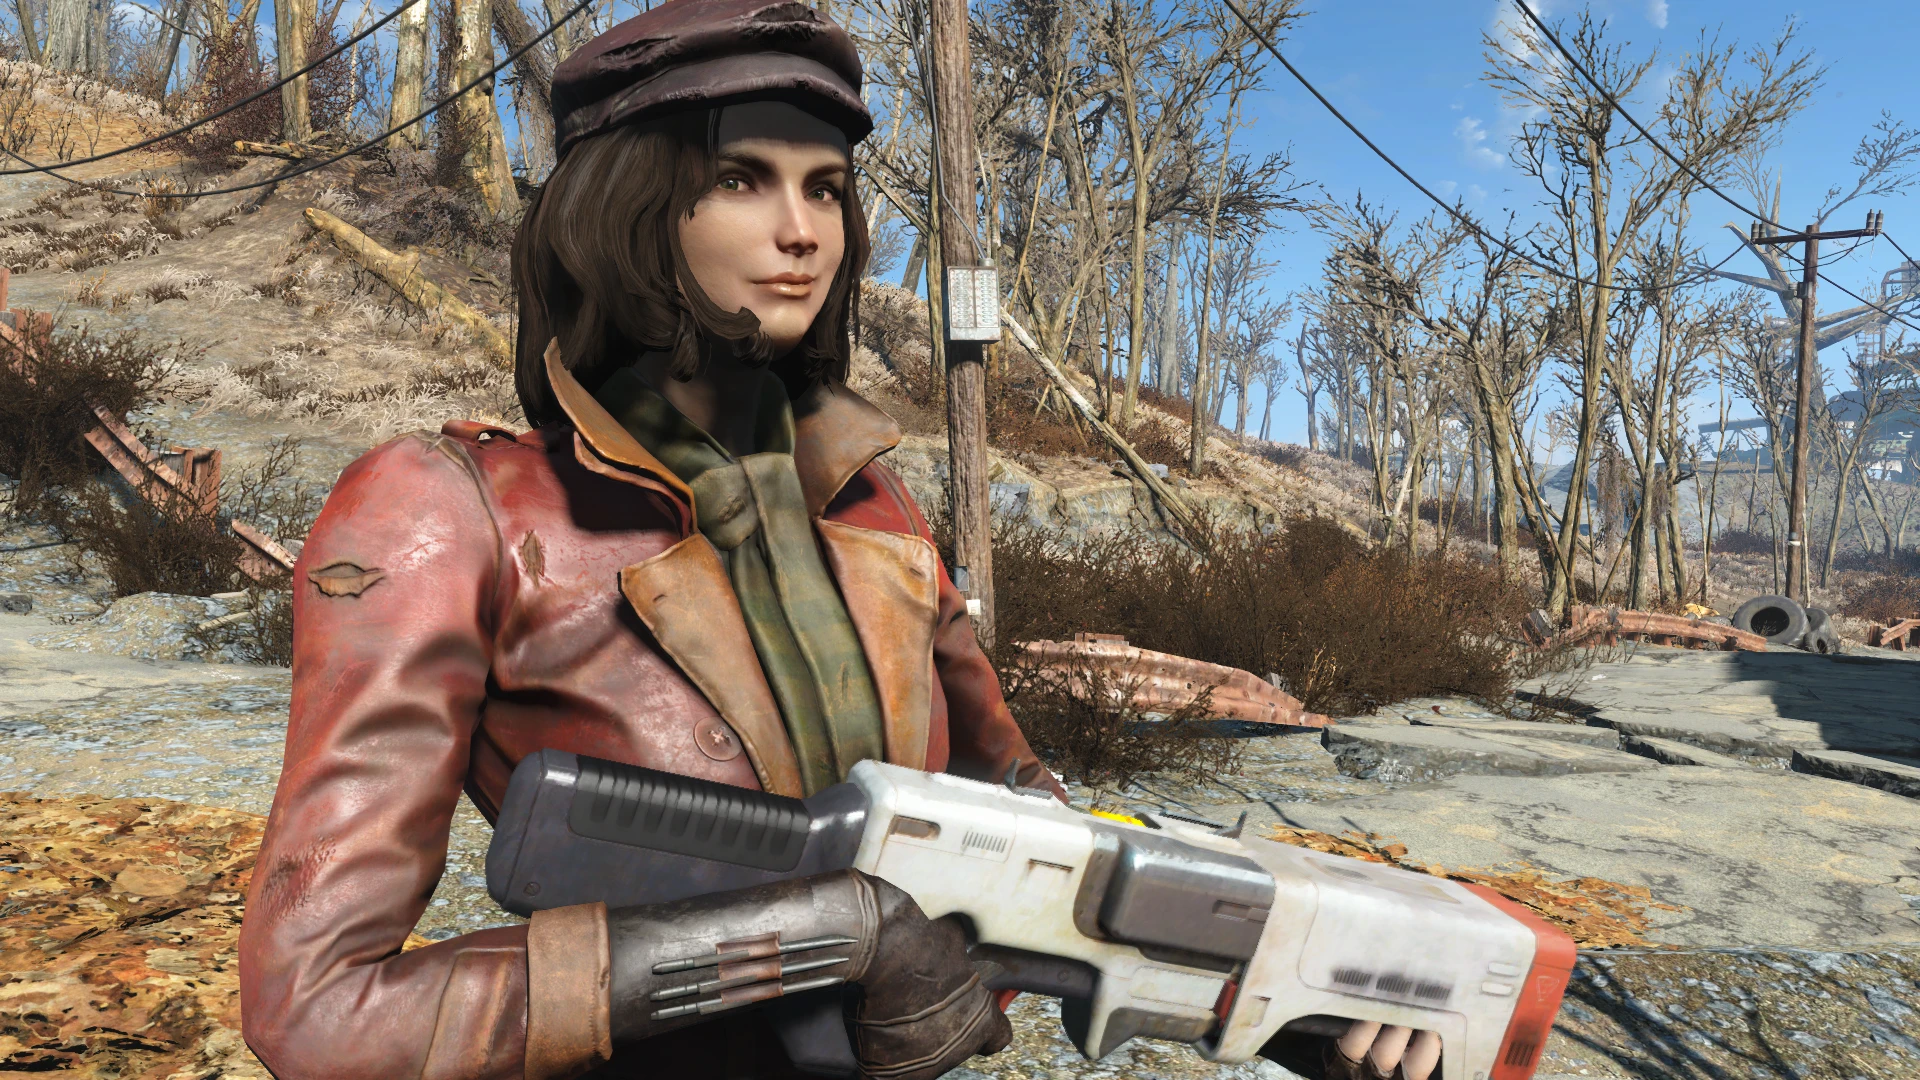 Fallout 4 Piper Related Keywords & Suggestions - Fallout 4 P